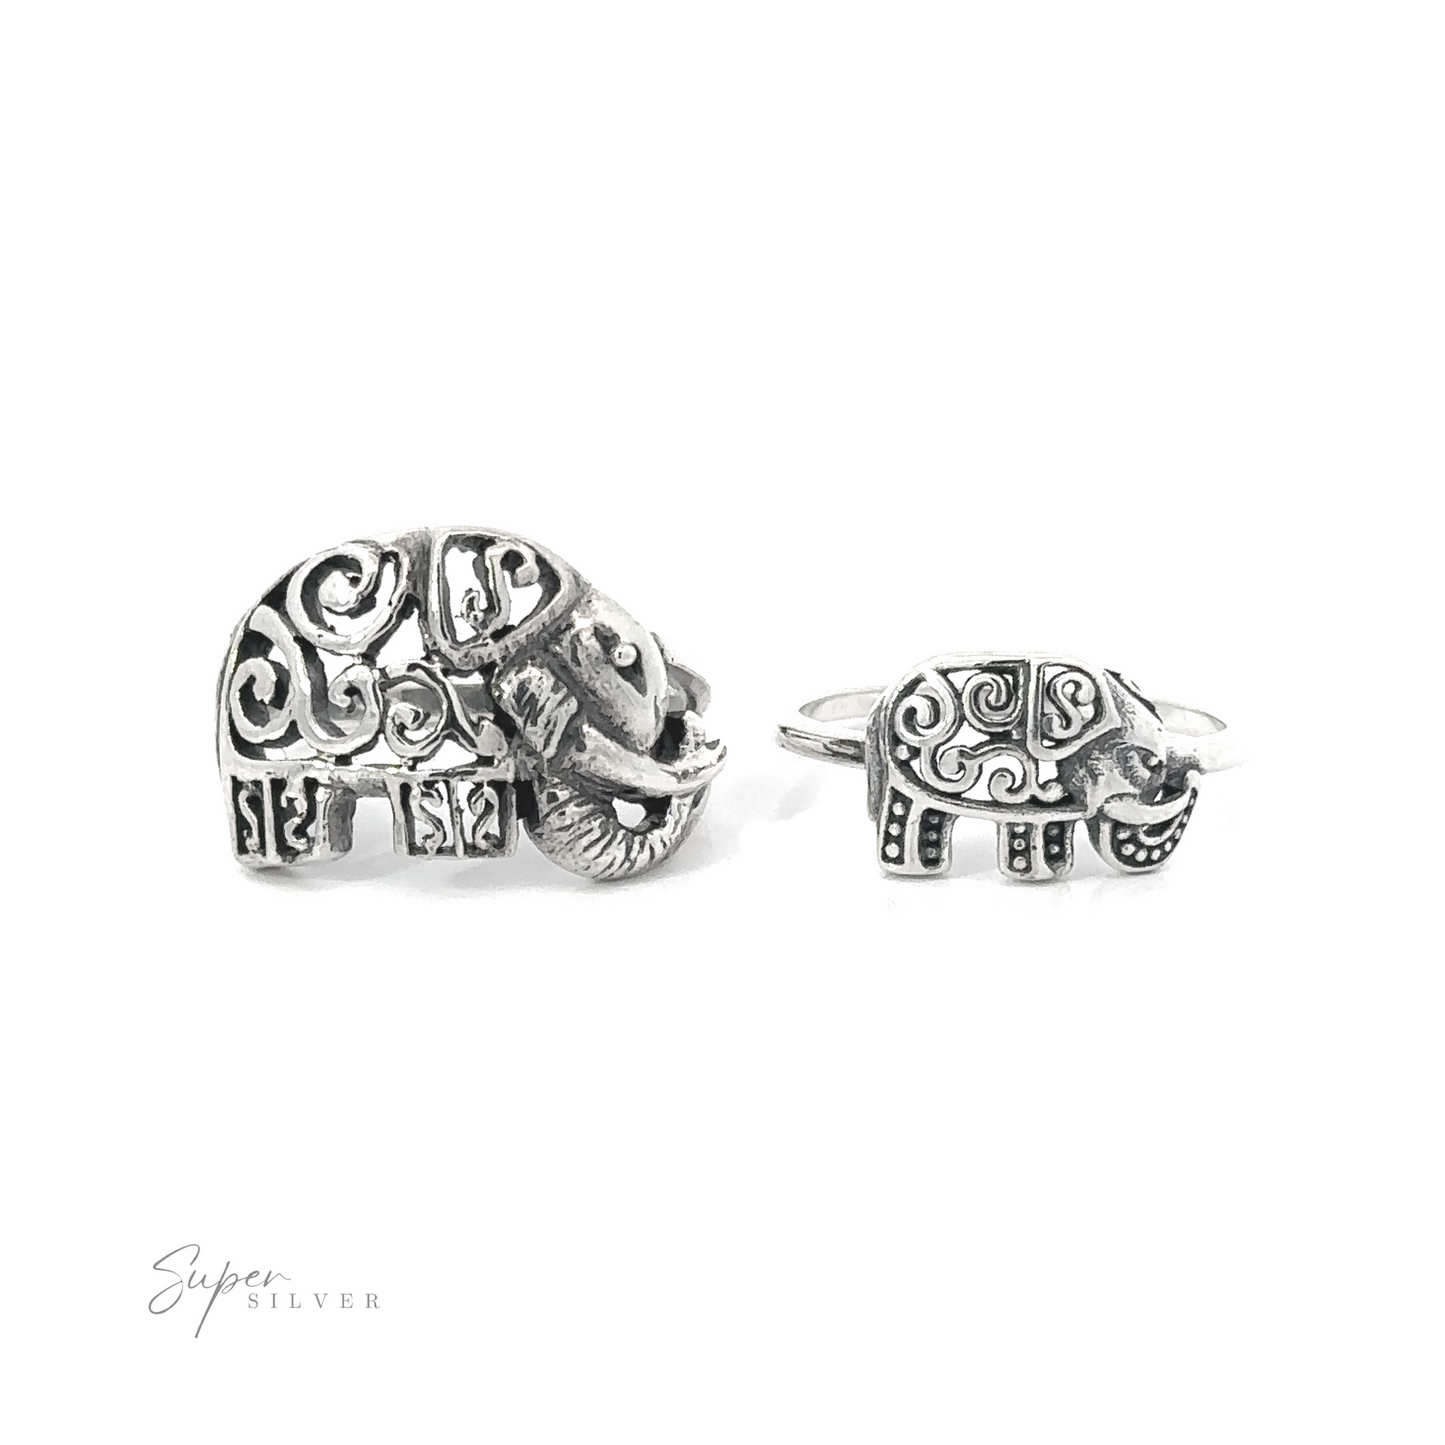 Silver Filigree Elephant Ring with intricate designs.
Product Name: Filigree Elephant Ring